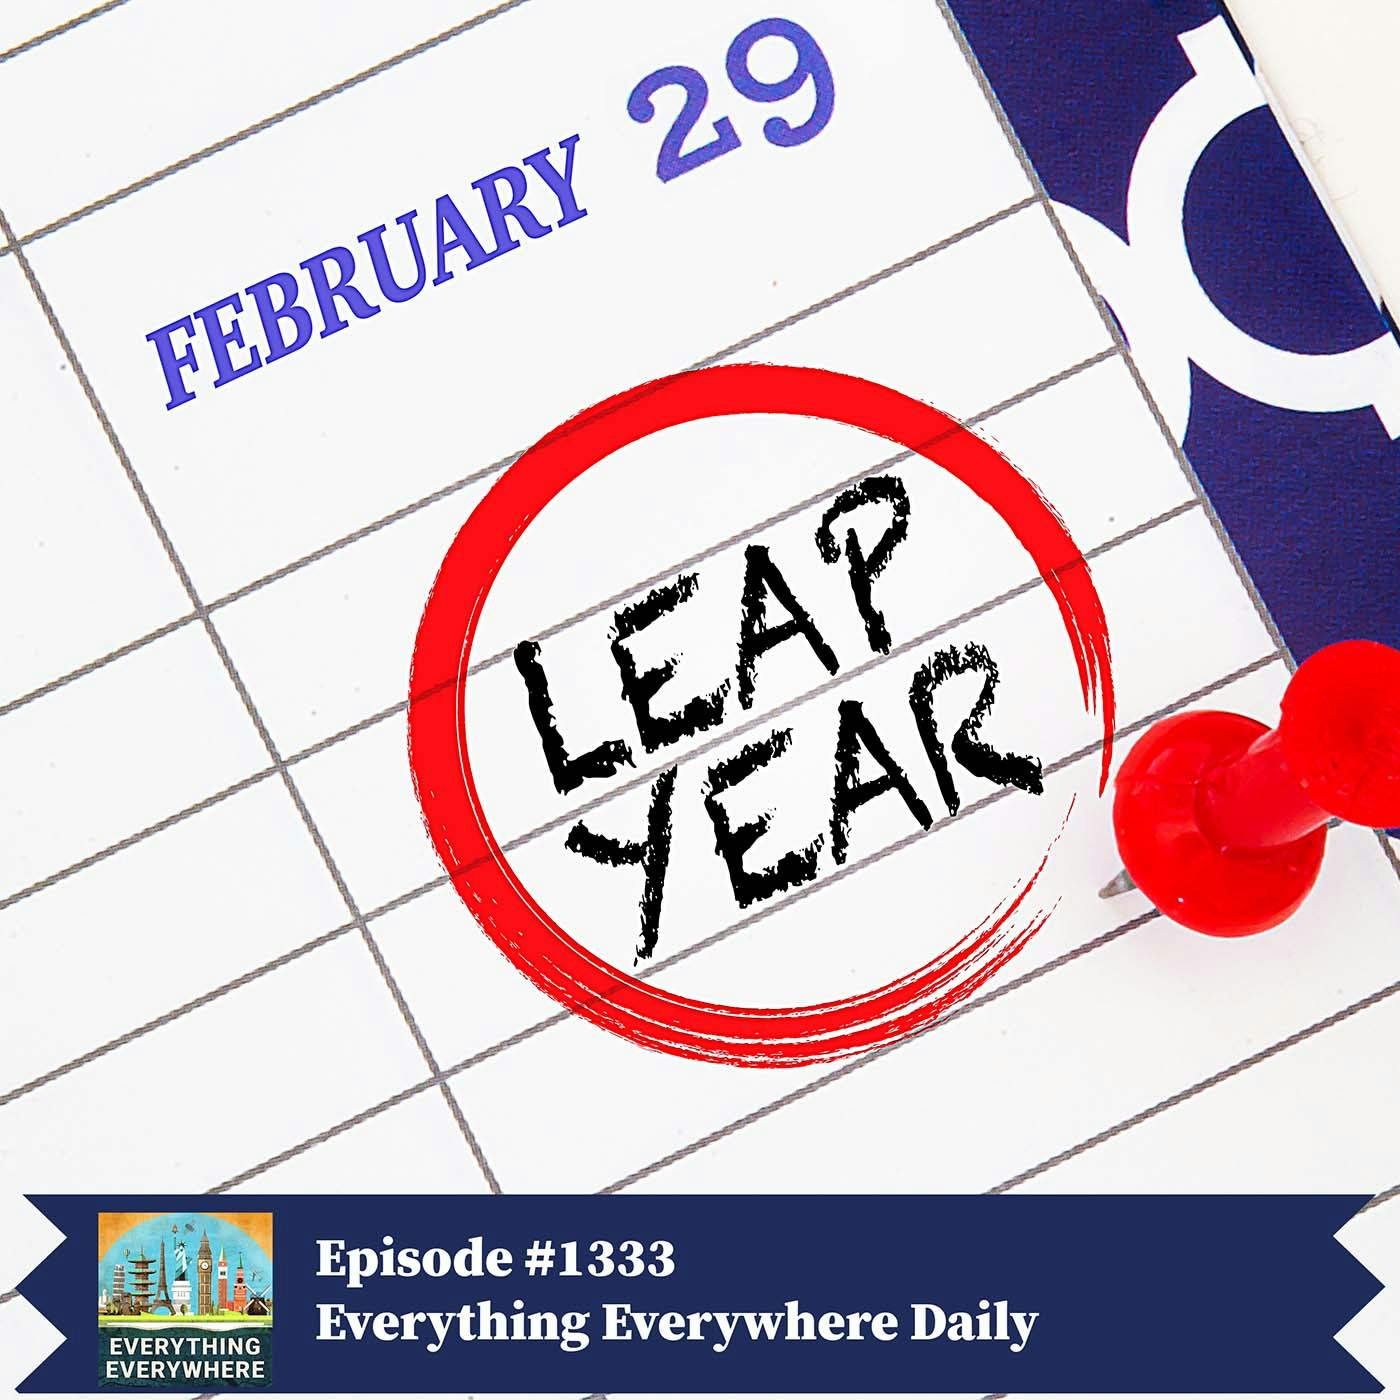 Leap Years and Leap Day